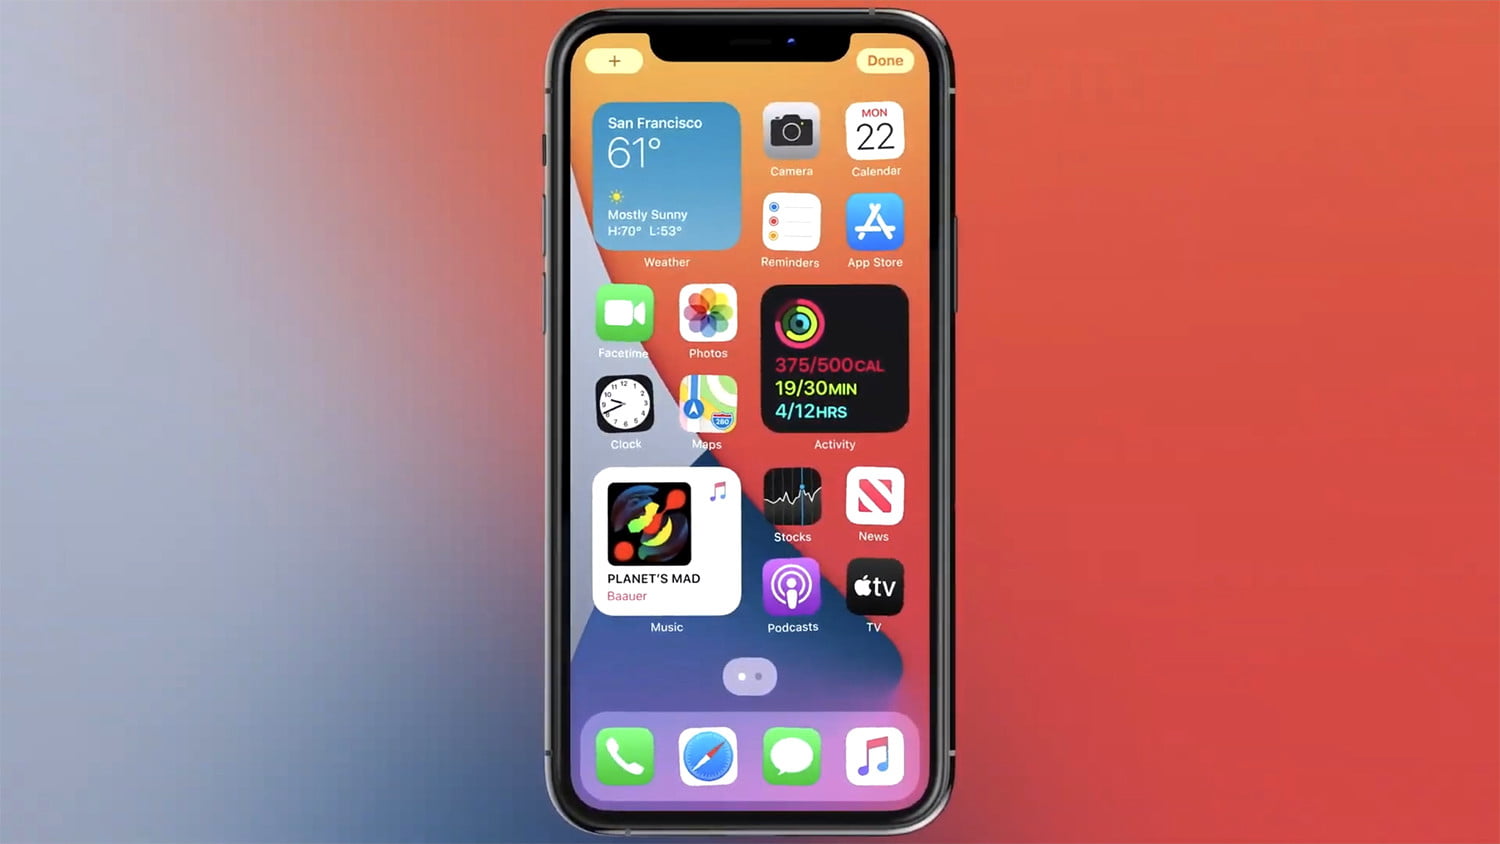 Apple launches iOS 14 with new iPhone home screen, Siri, gadgets, picture-in-picture video and more